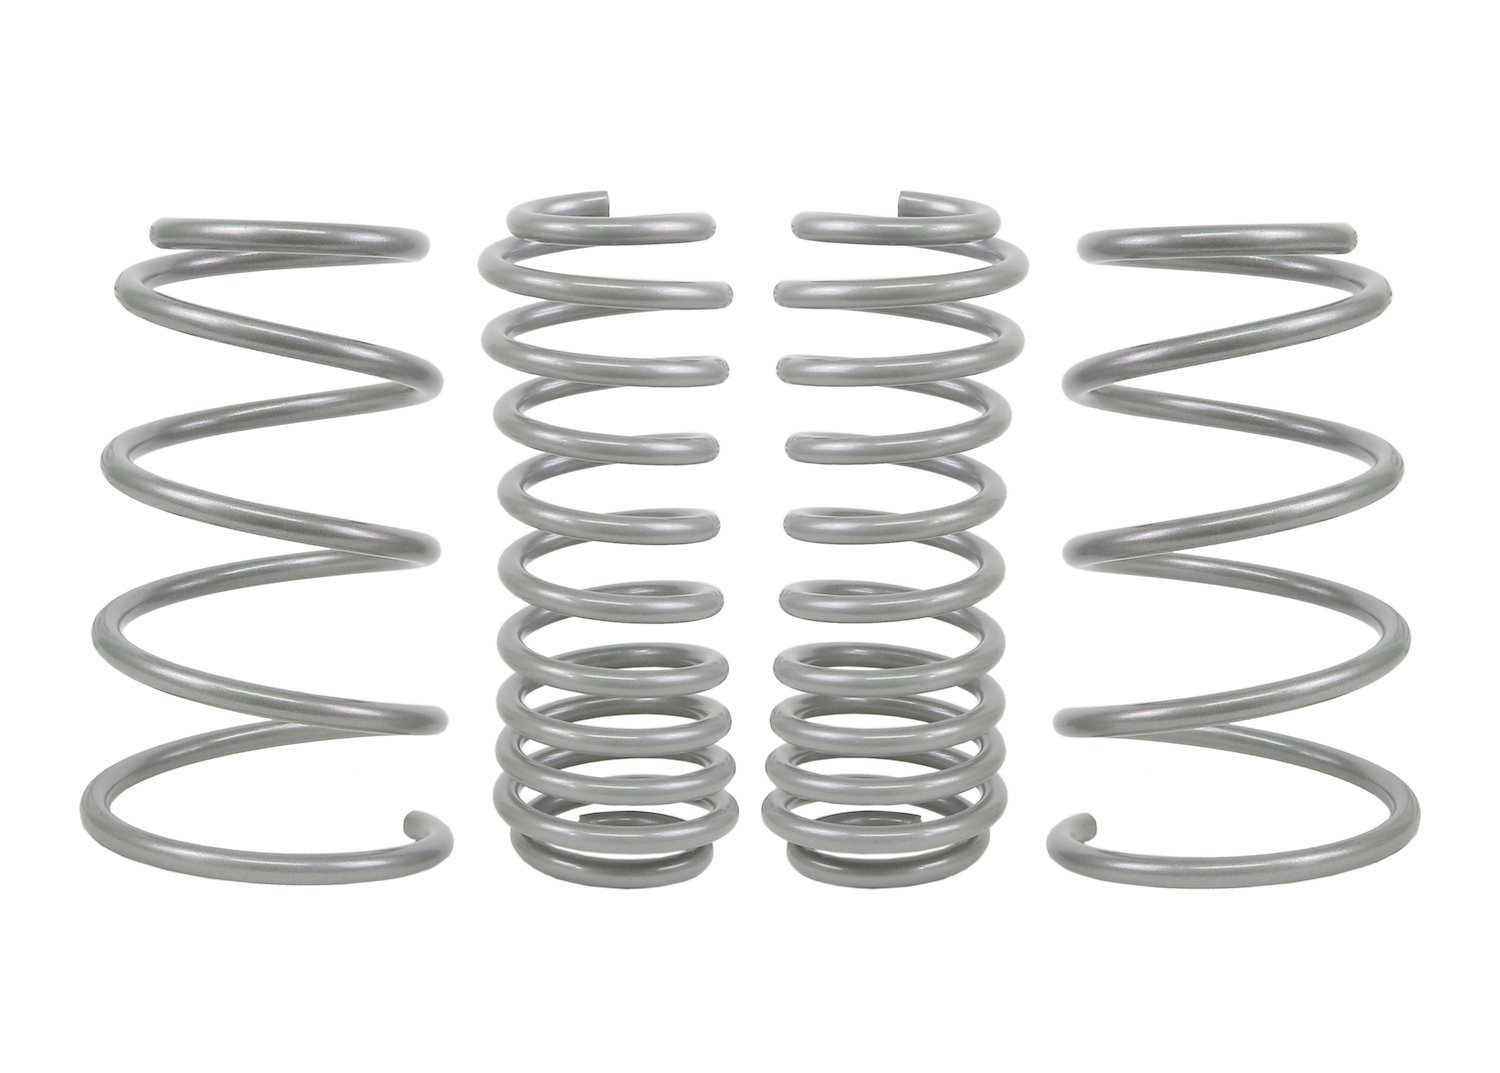 WSK-FRD005 Performance Lowering Springs for 2005-2014 Ford Mustang GT